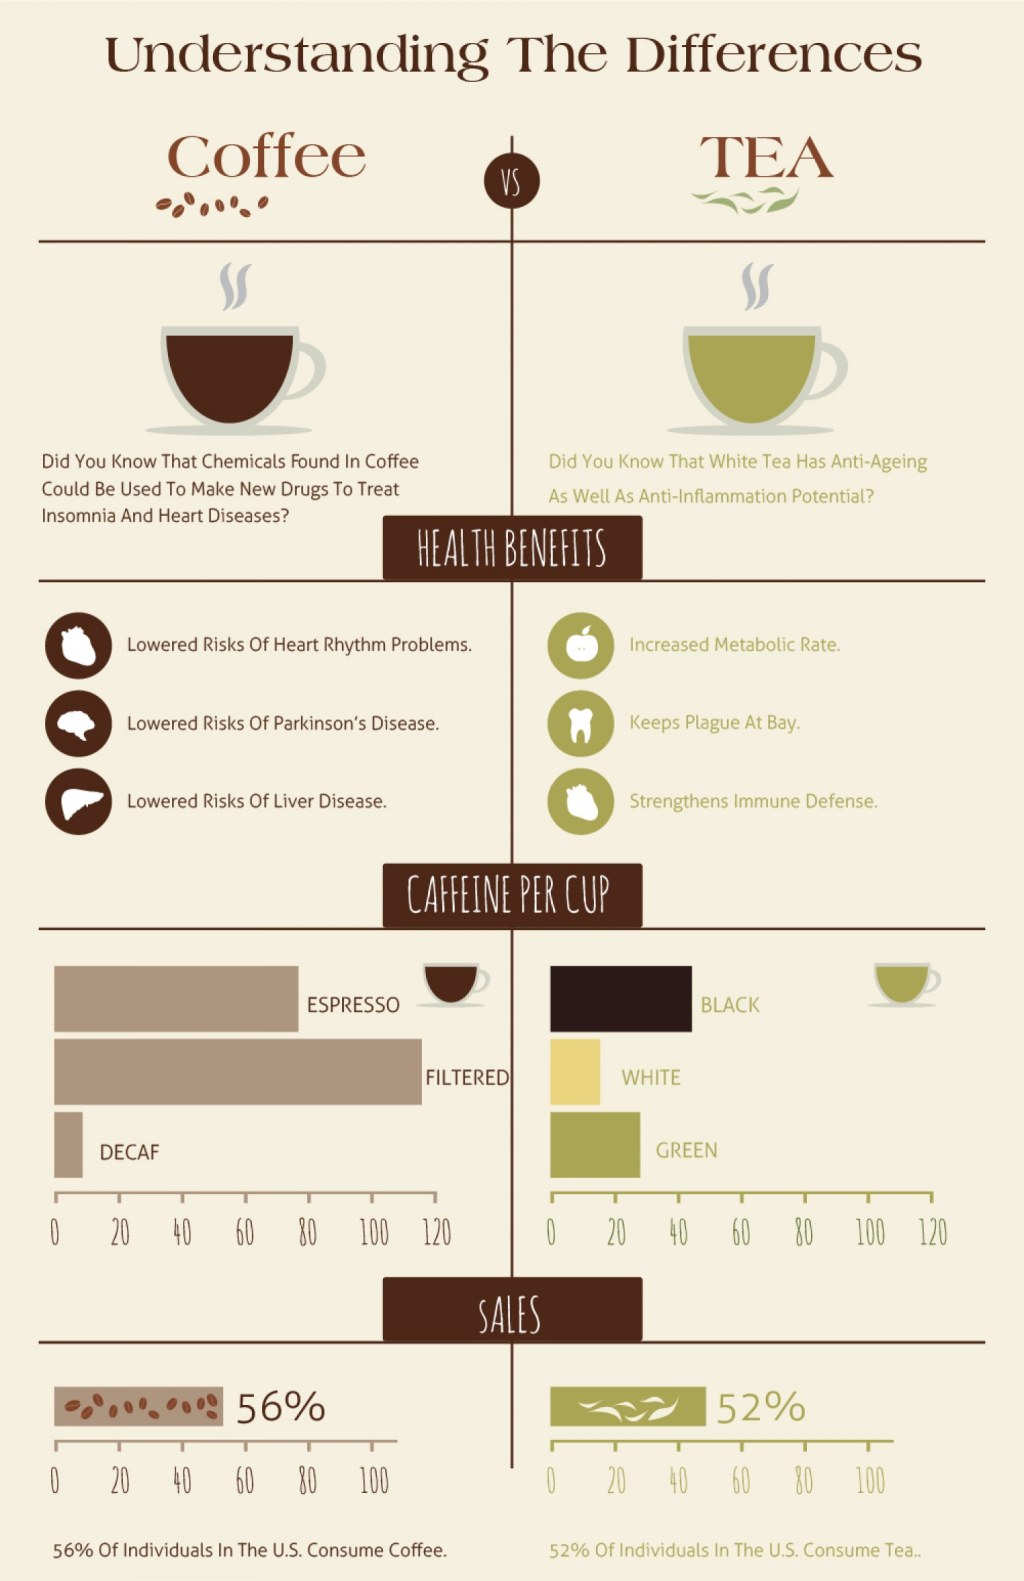 Picture of: Is Green Tea Better Or Coffee? A Comparison (Infographic